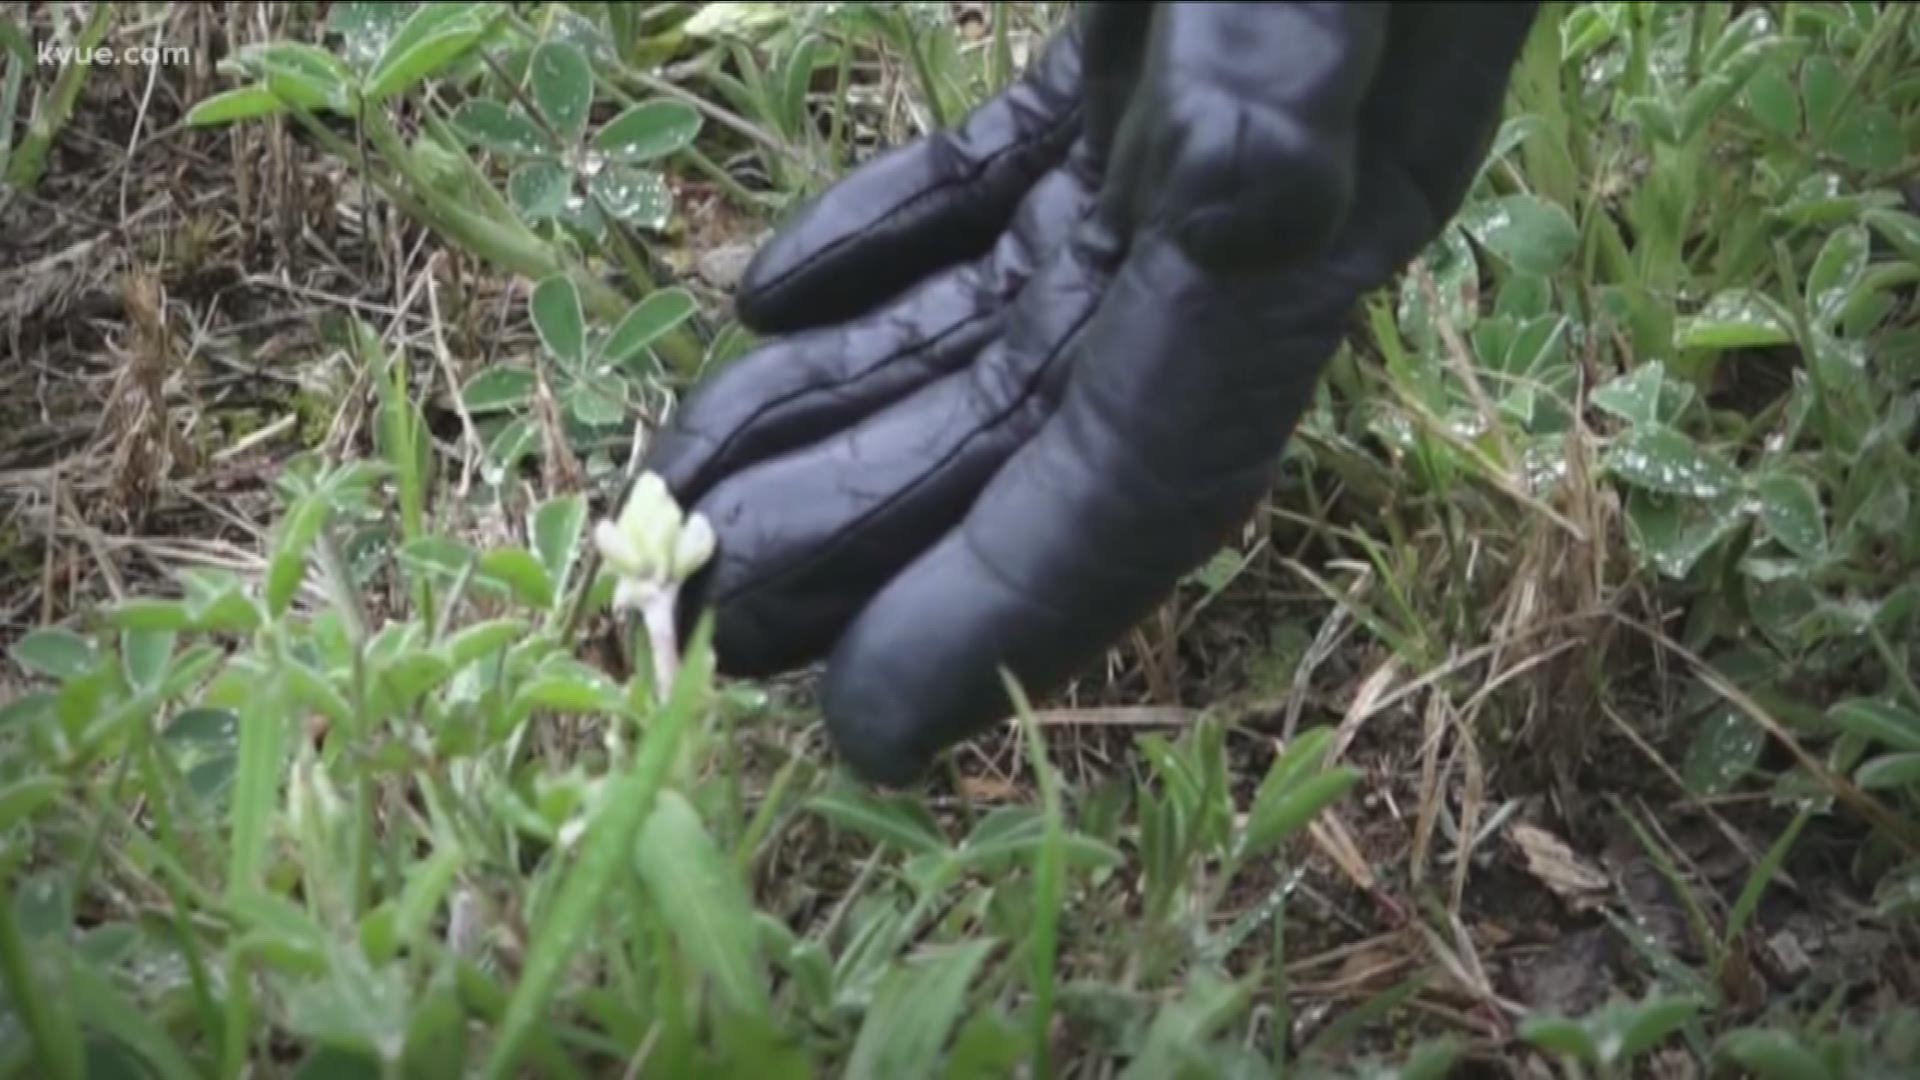 Bluebonnets are a true Texas treasure, so when someone cuts them down, people don't take it lightly. Juan Rodriguez met a woman who isn't happy about what she saw this week.